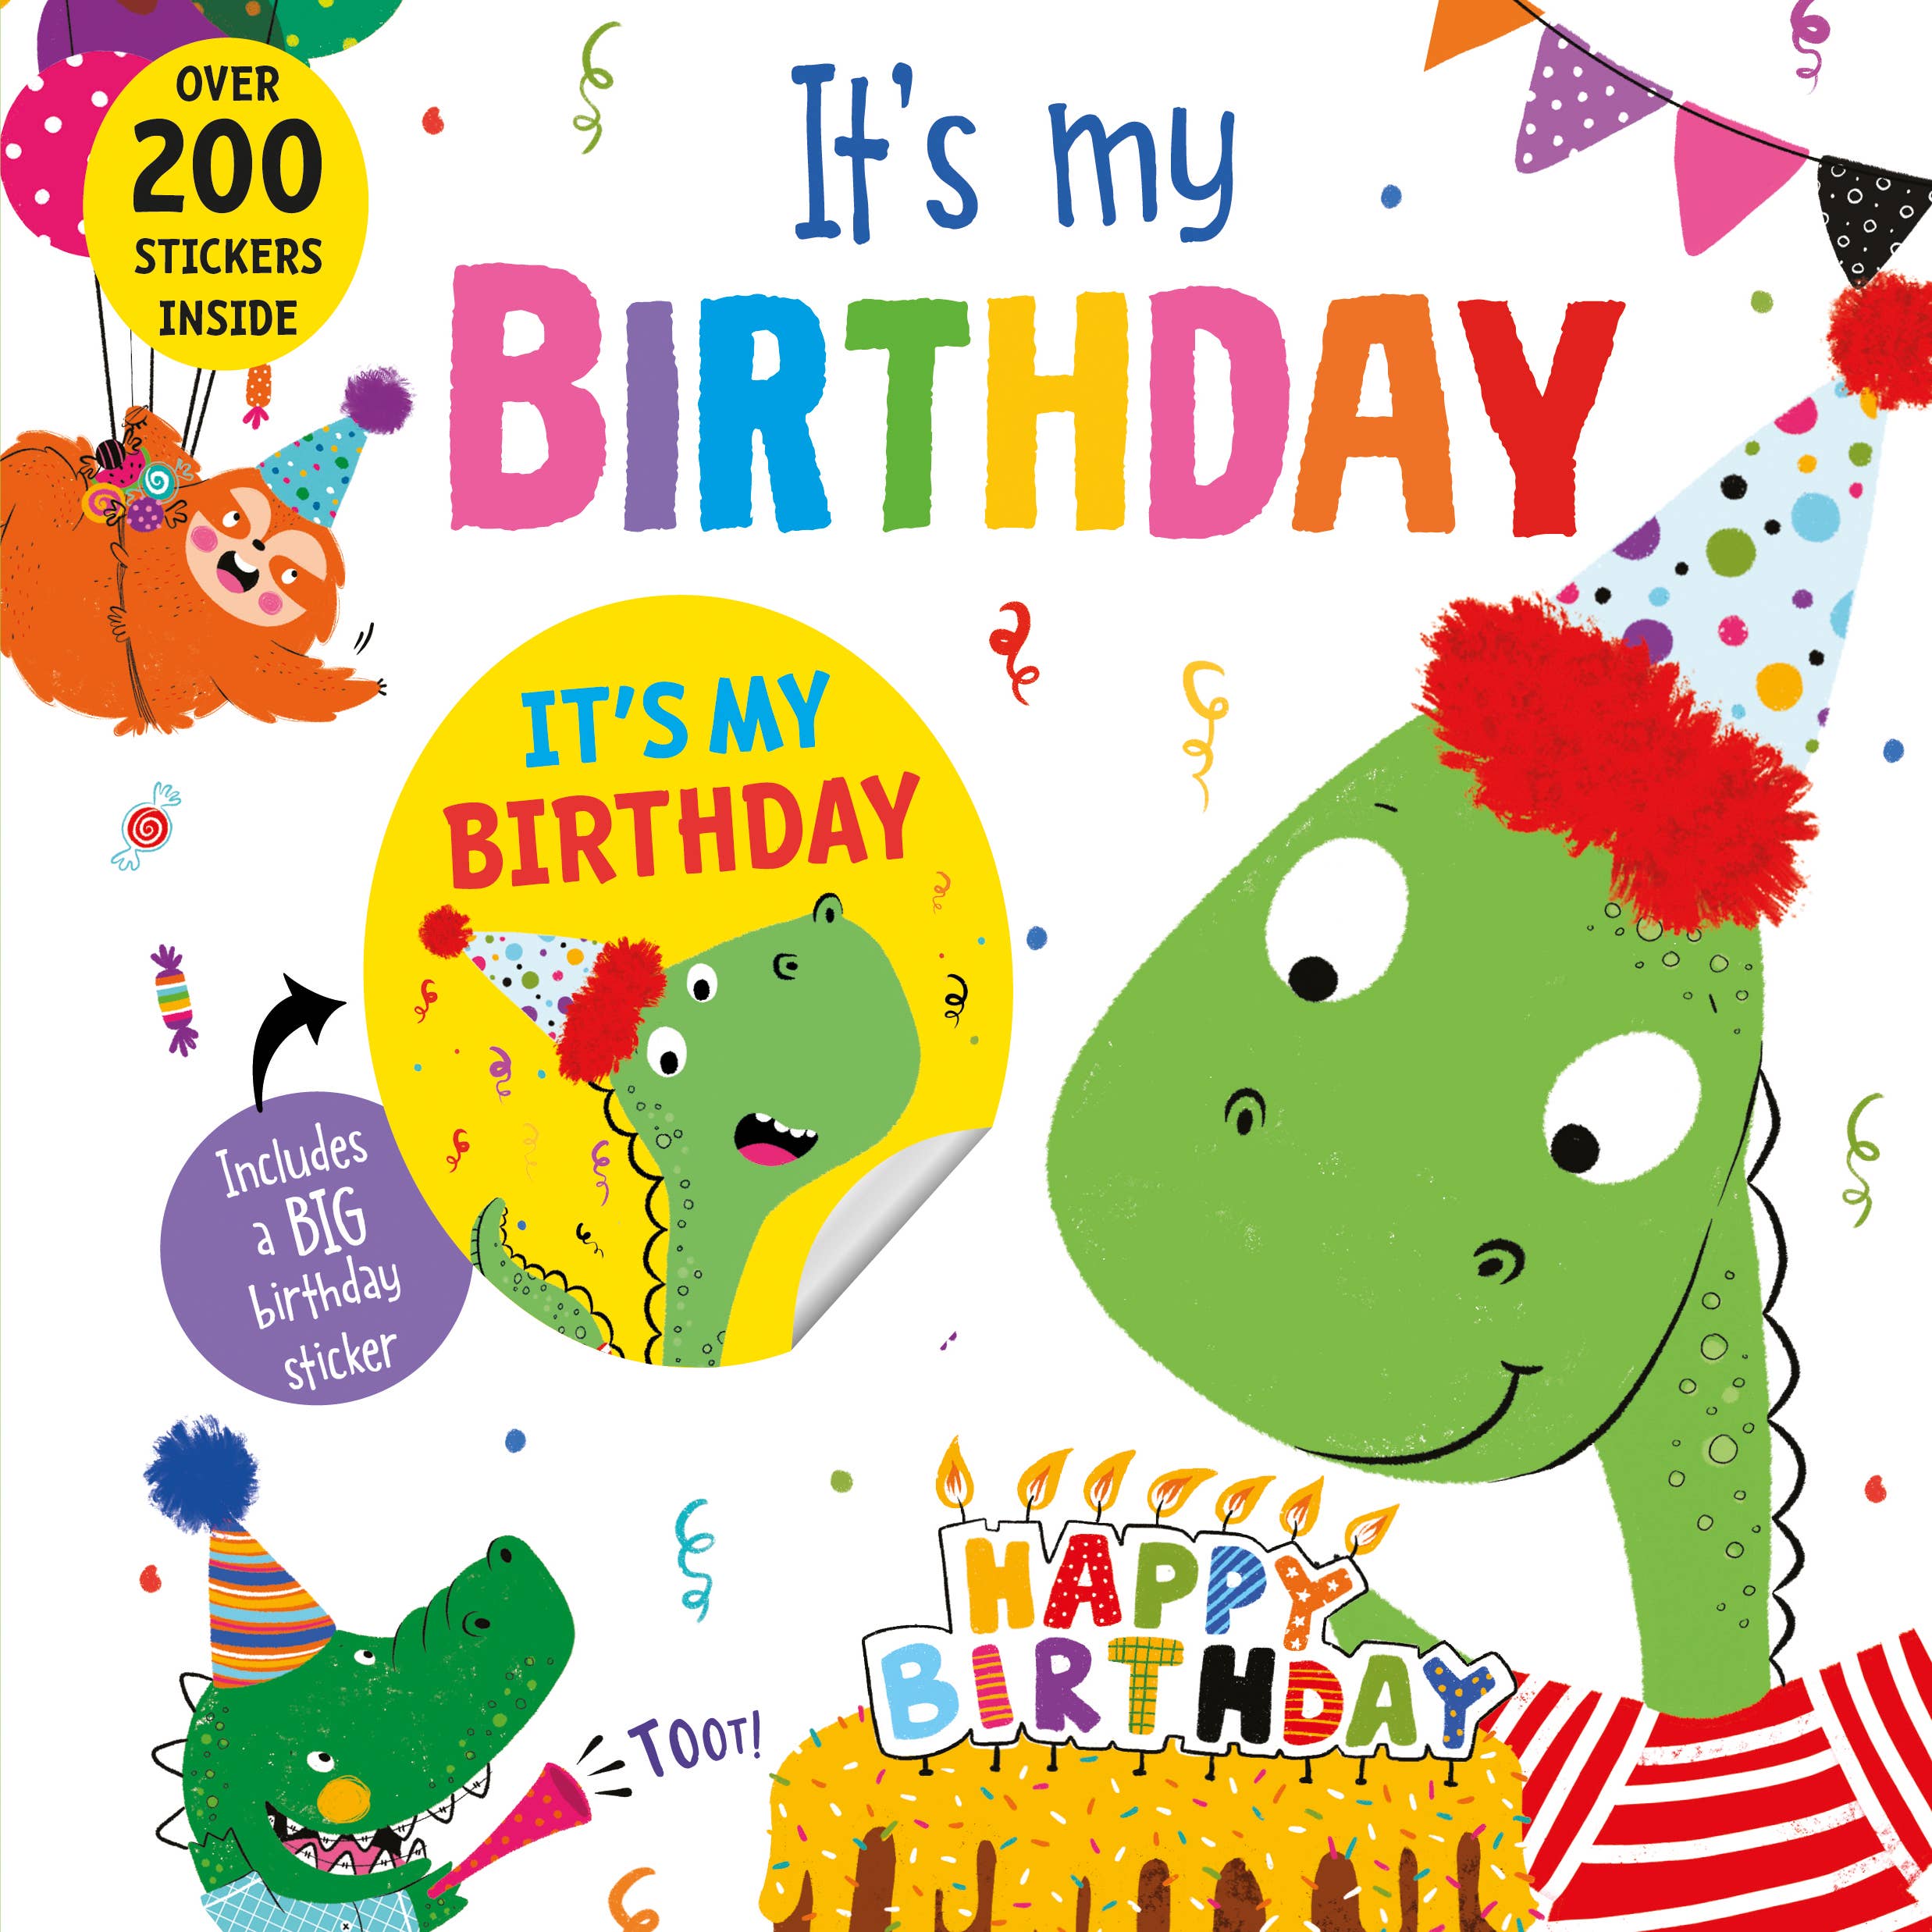 It's My Birthday (Dinosaur cover) Hardcover Picture Book